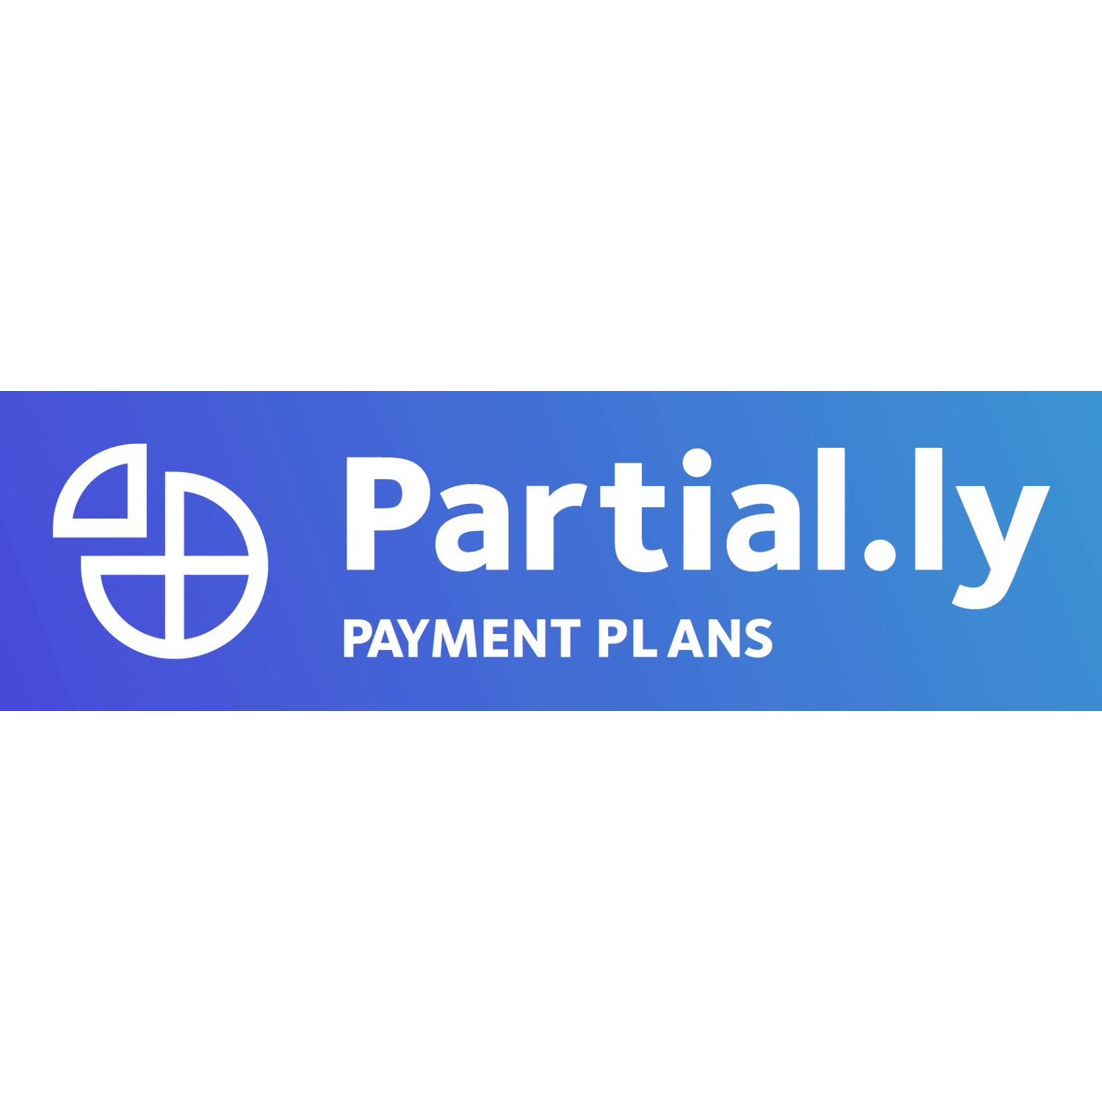 Excluding Partial.ly from some Products in your Shopify store-JadePuma